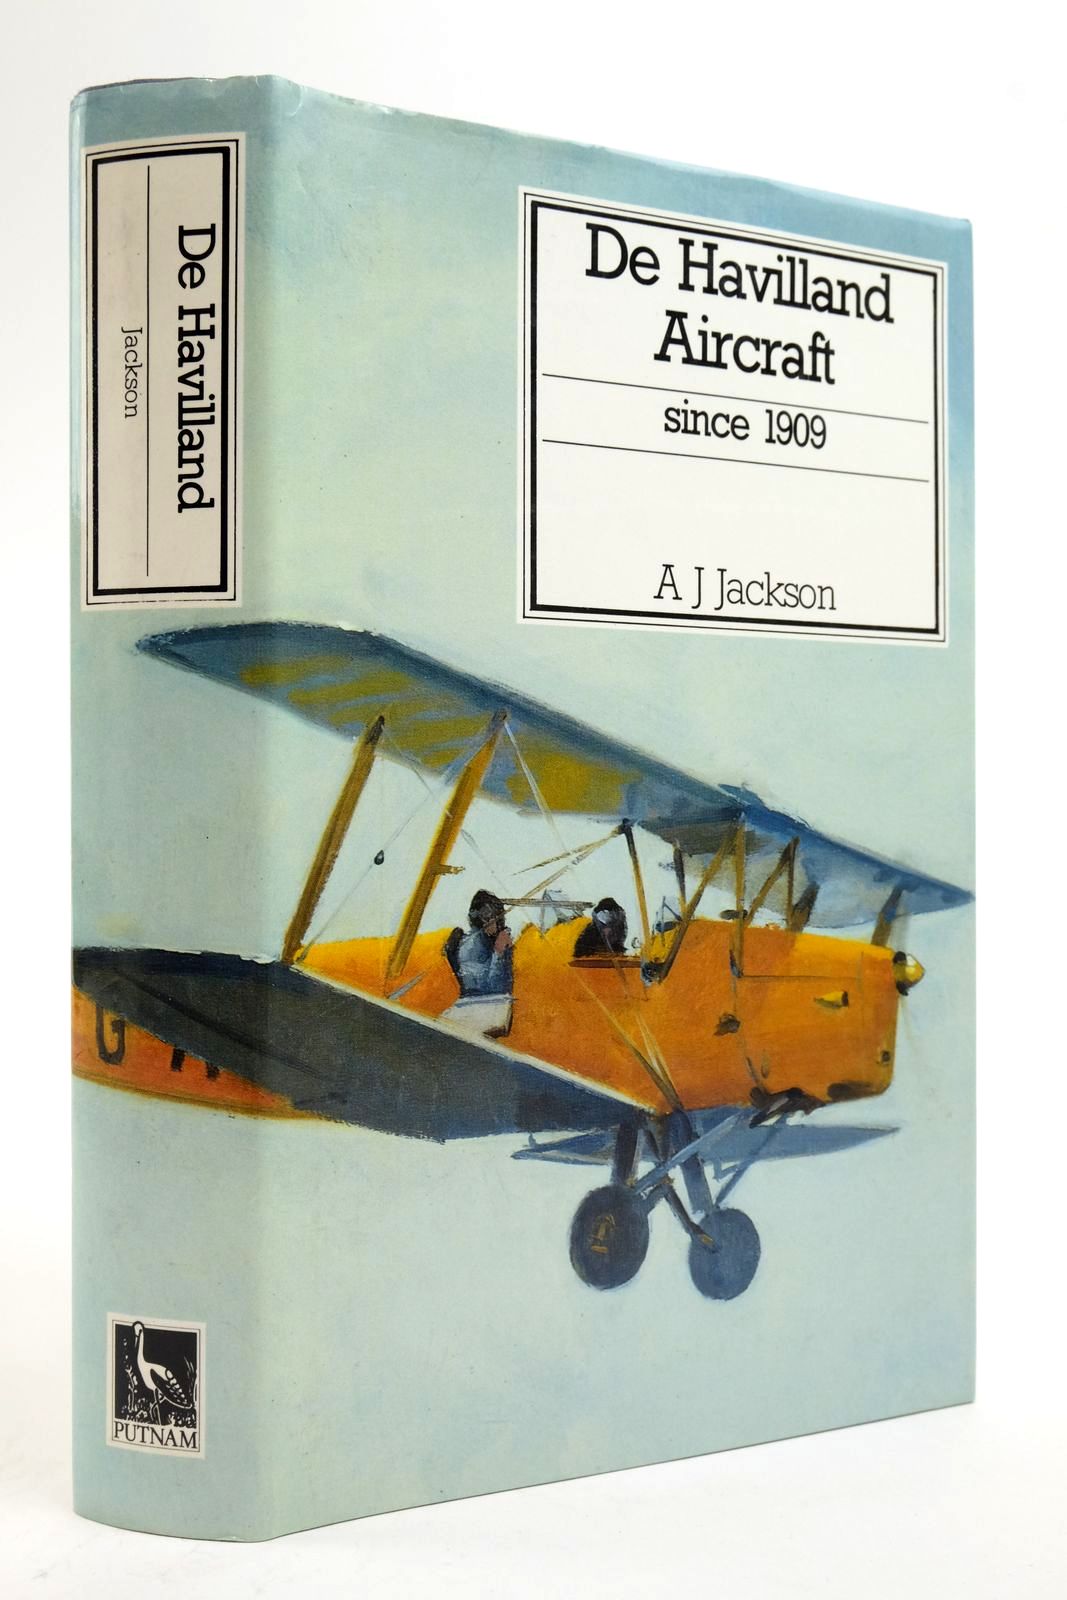 Photo of DE HAVILLAND AIRCRAFT SINCE 1909 written by Jackson, A.J. published by Putnam (STOCK CODE: 2138486)  for sale by Stella & Rose's Books